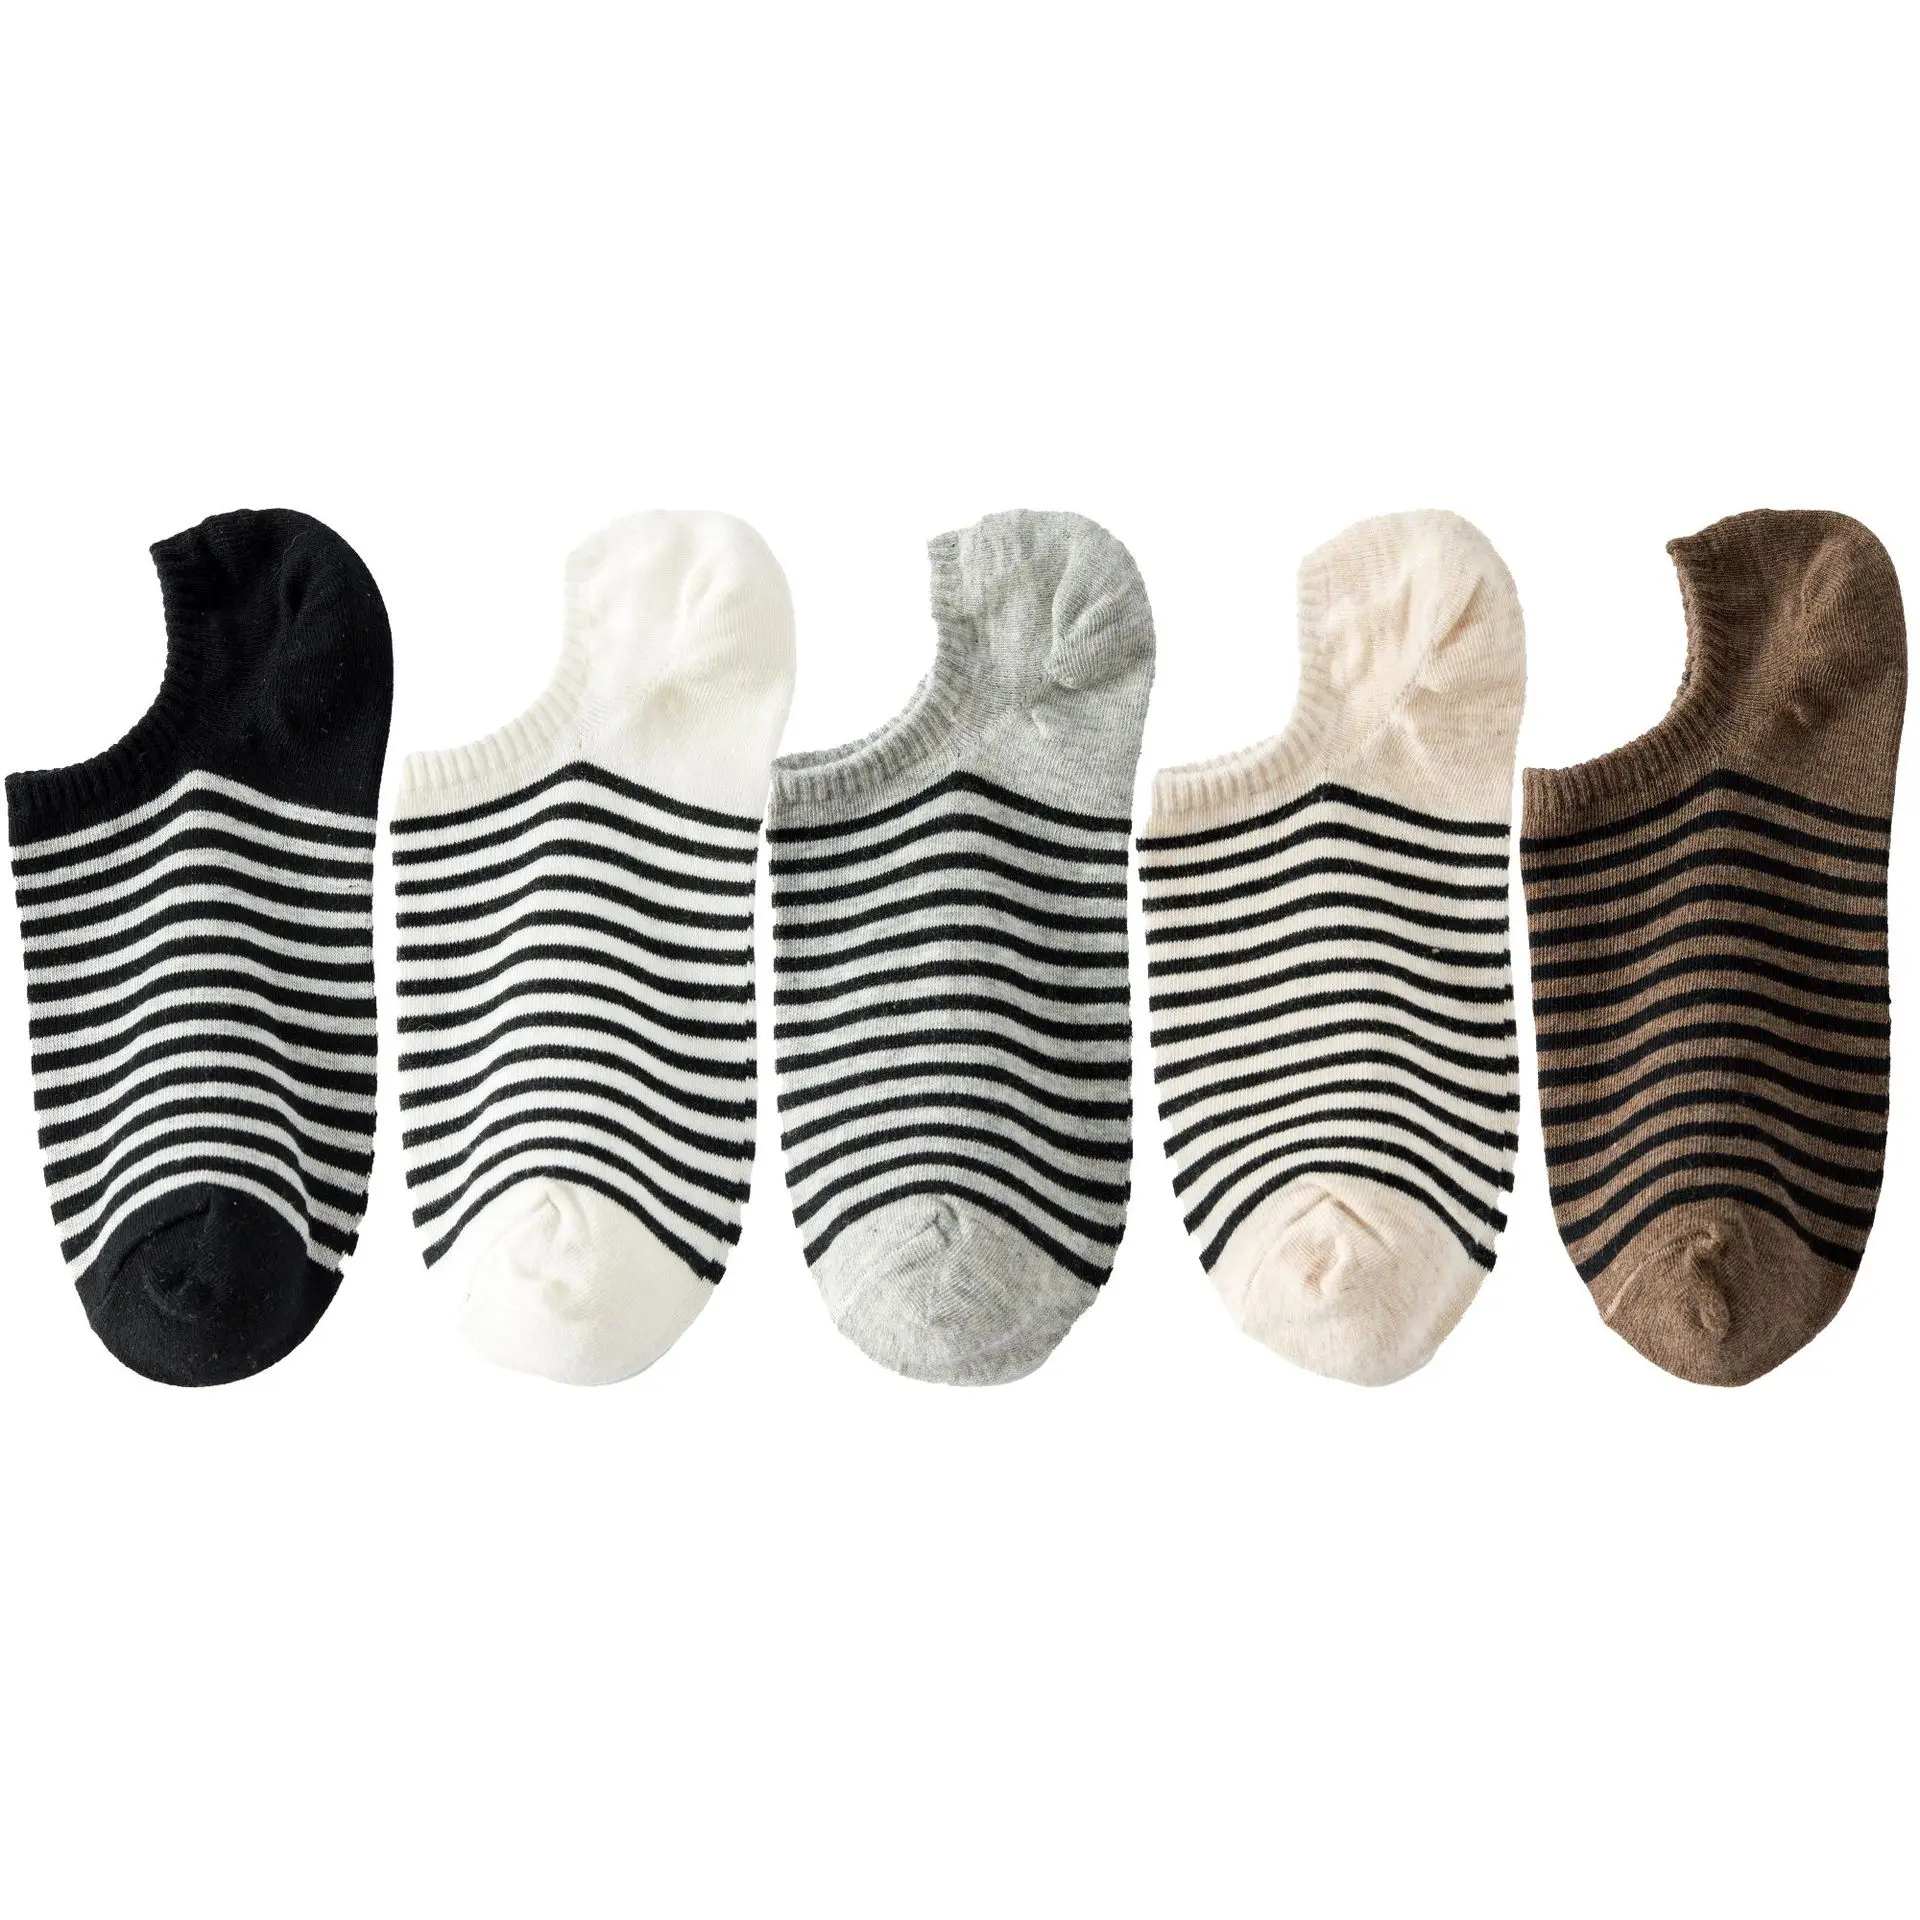 

5 Pairs/lot Women Sock Korea Harajuku Solid Striped Cotton Ankle Sock Spring Summer Casual Femal Funny Sock Meias Calcetines